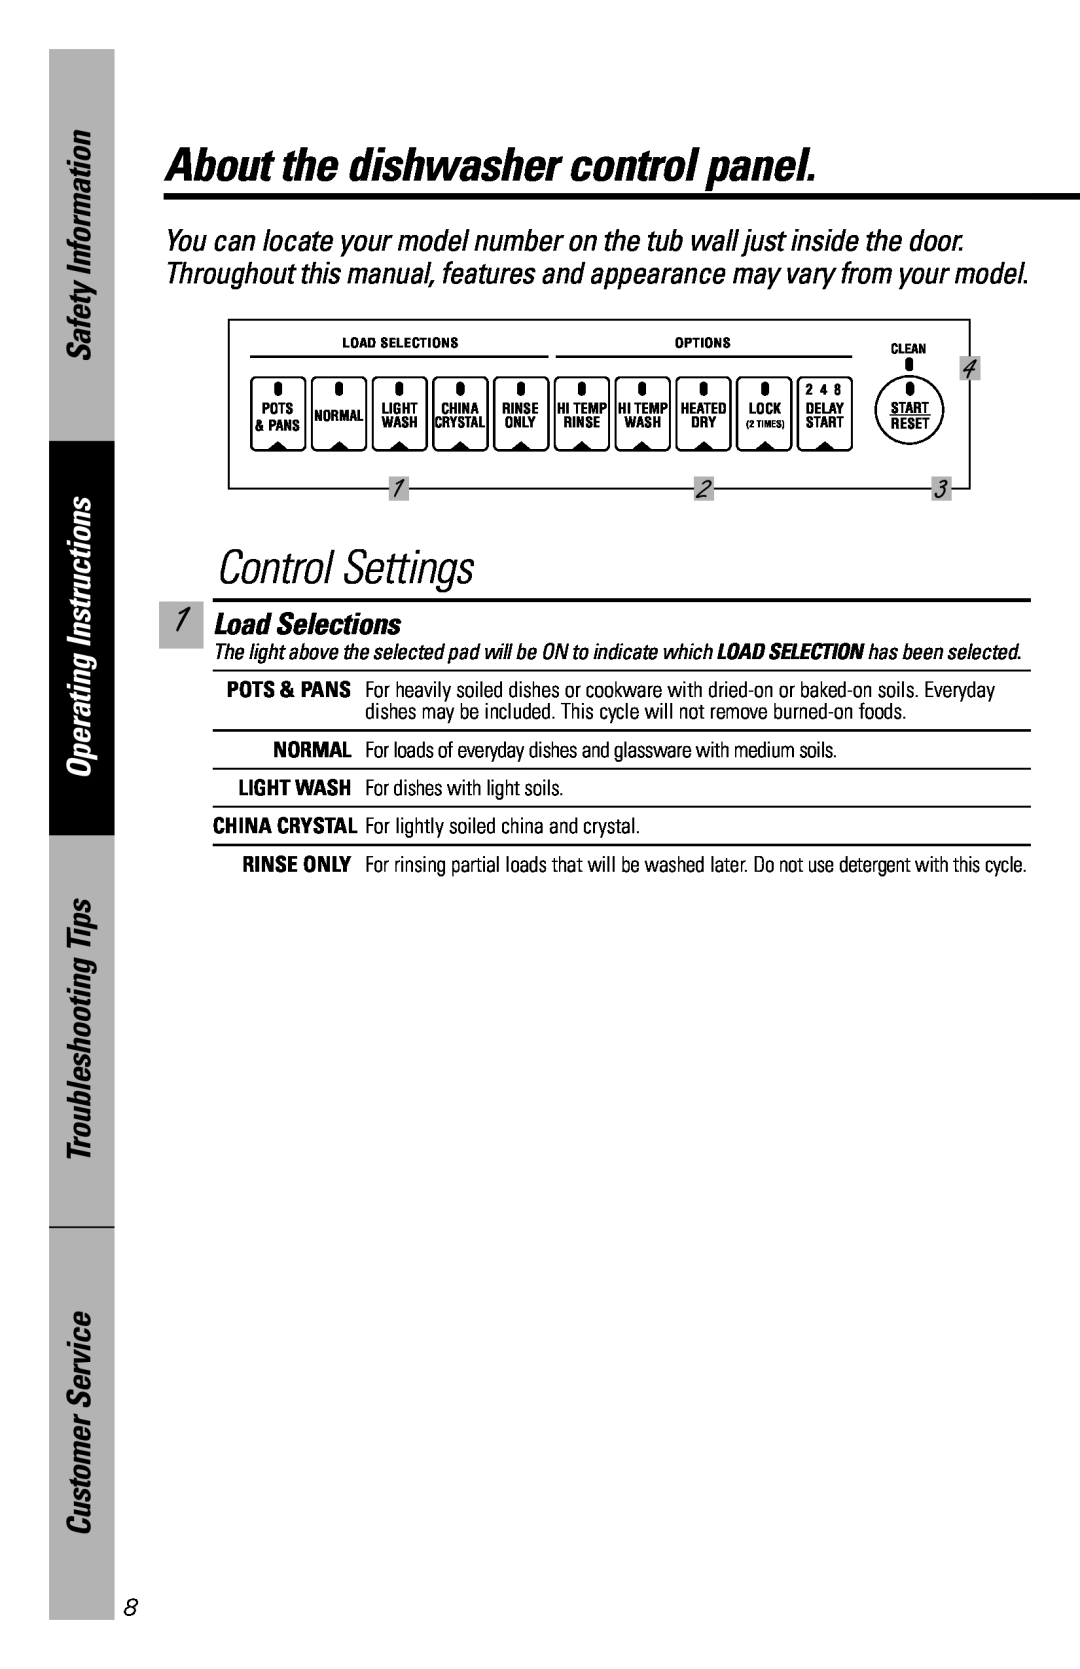 GE 165D4700P207, EDW2020 About the dishwasher control panel, Control Settings, Safety Information, Operating Instructions 